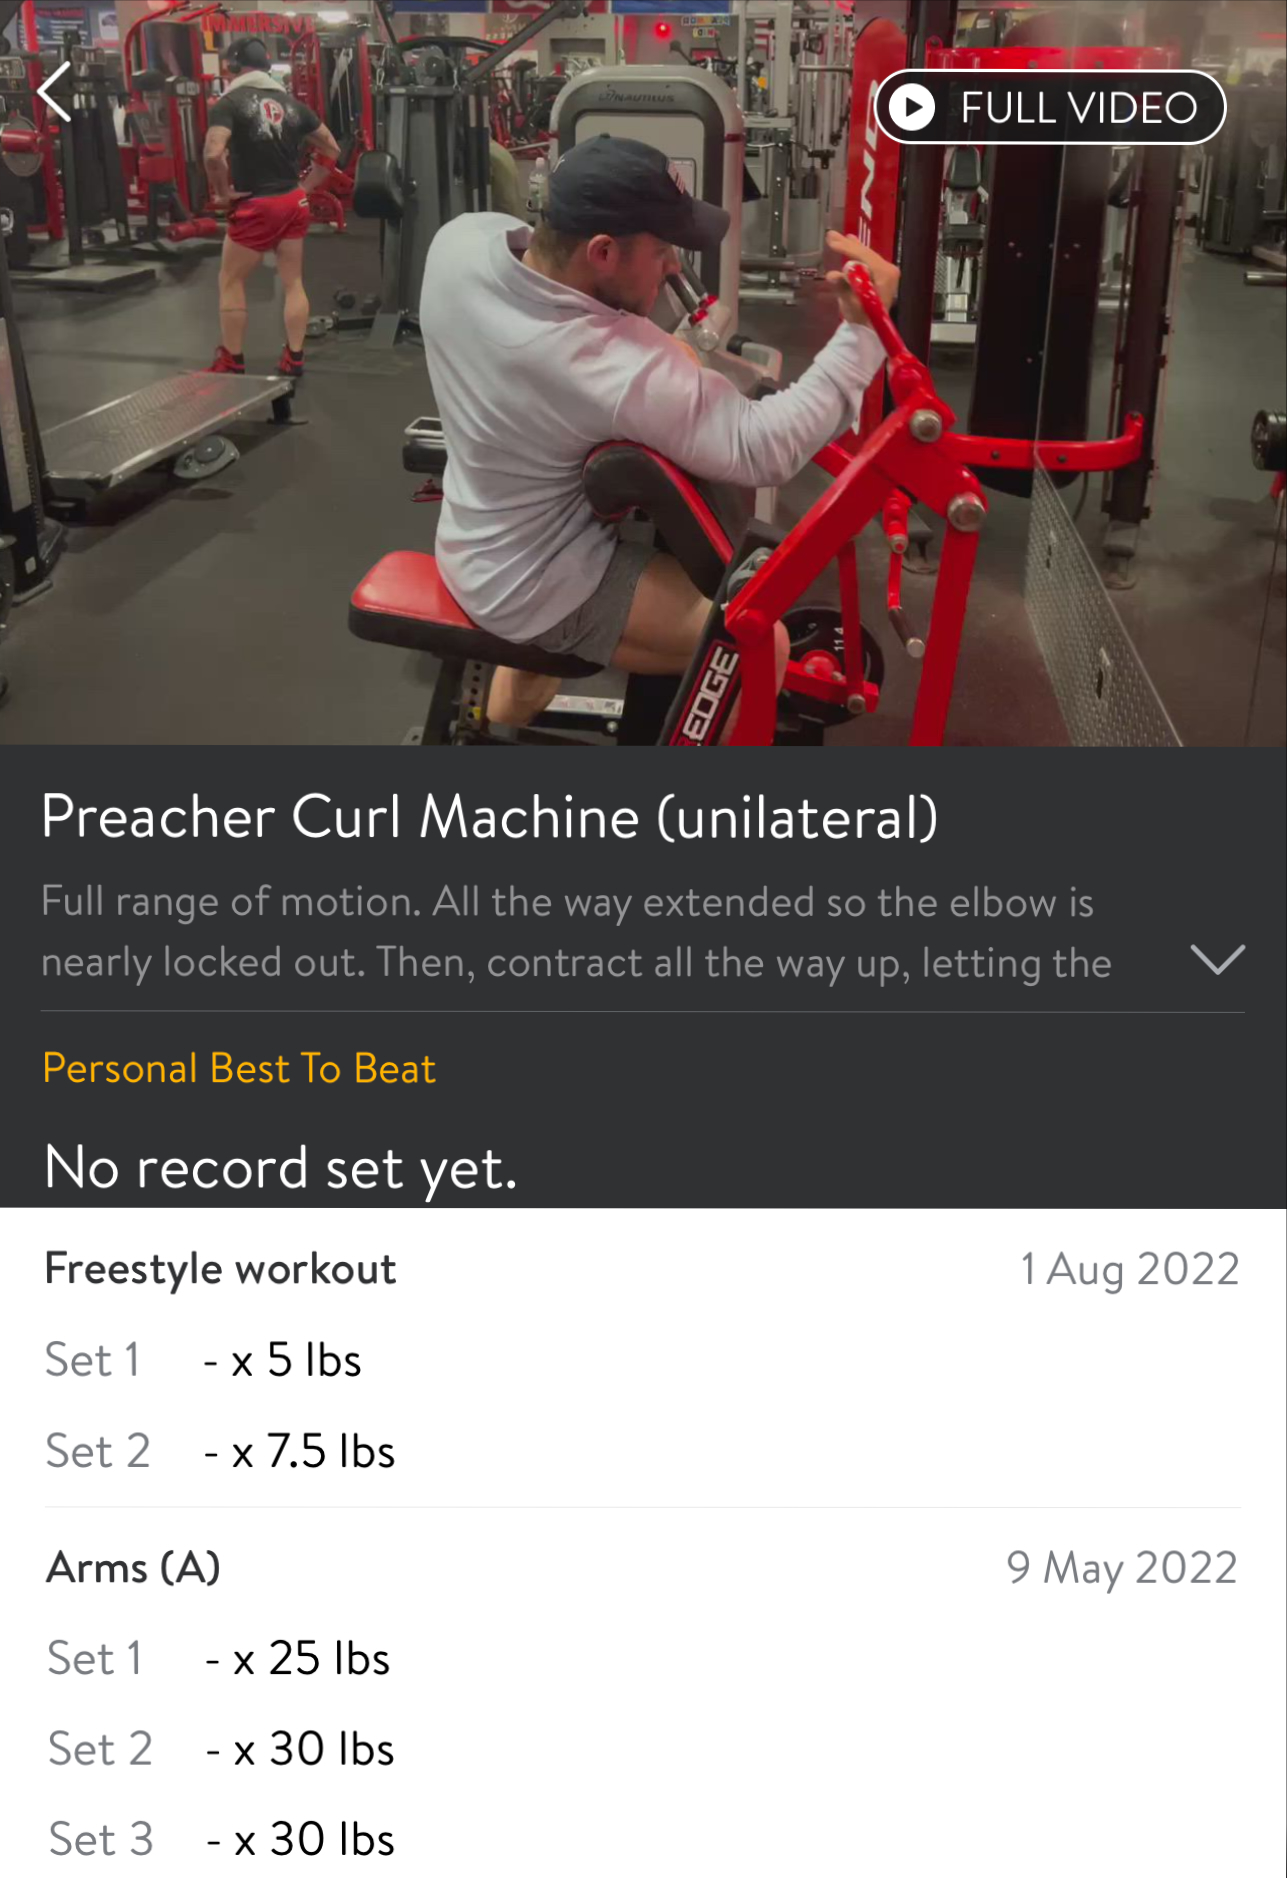 Library of Exercise Videos in our App